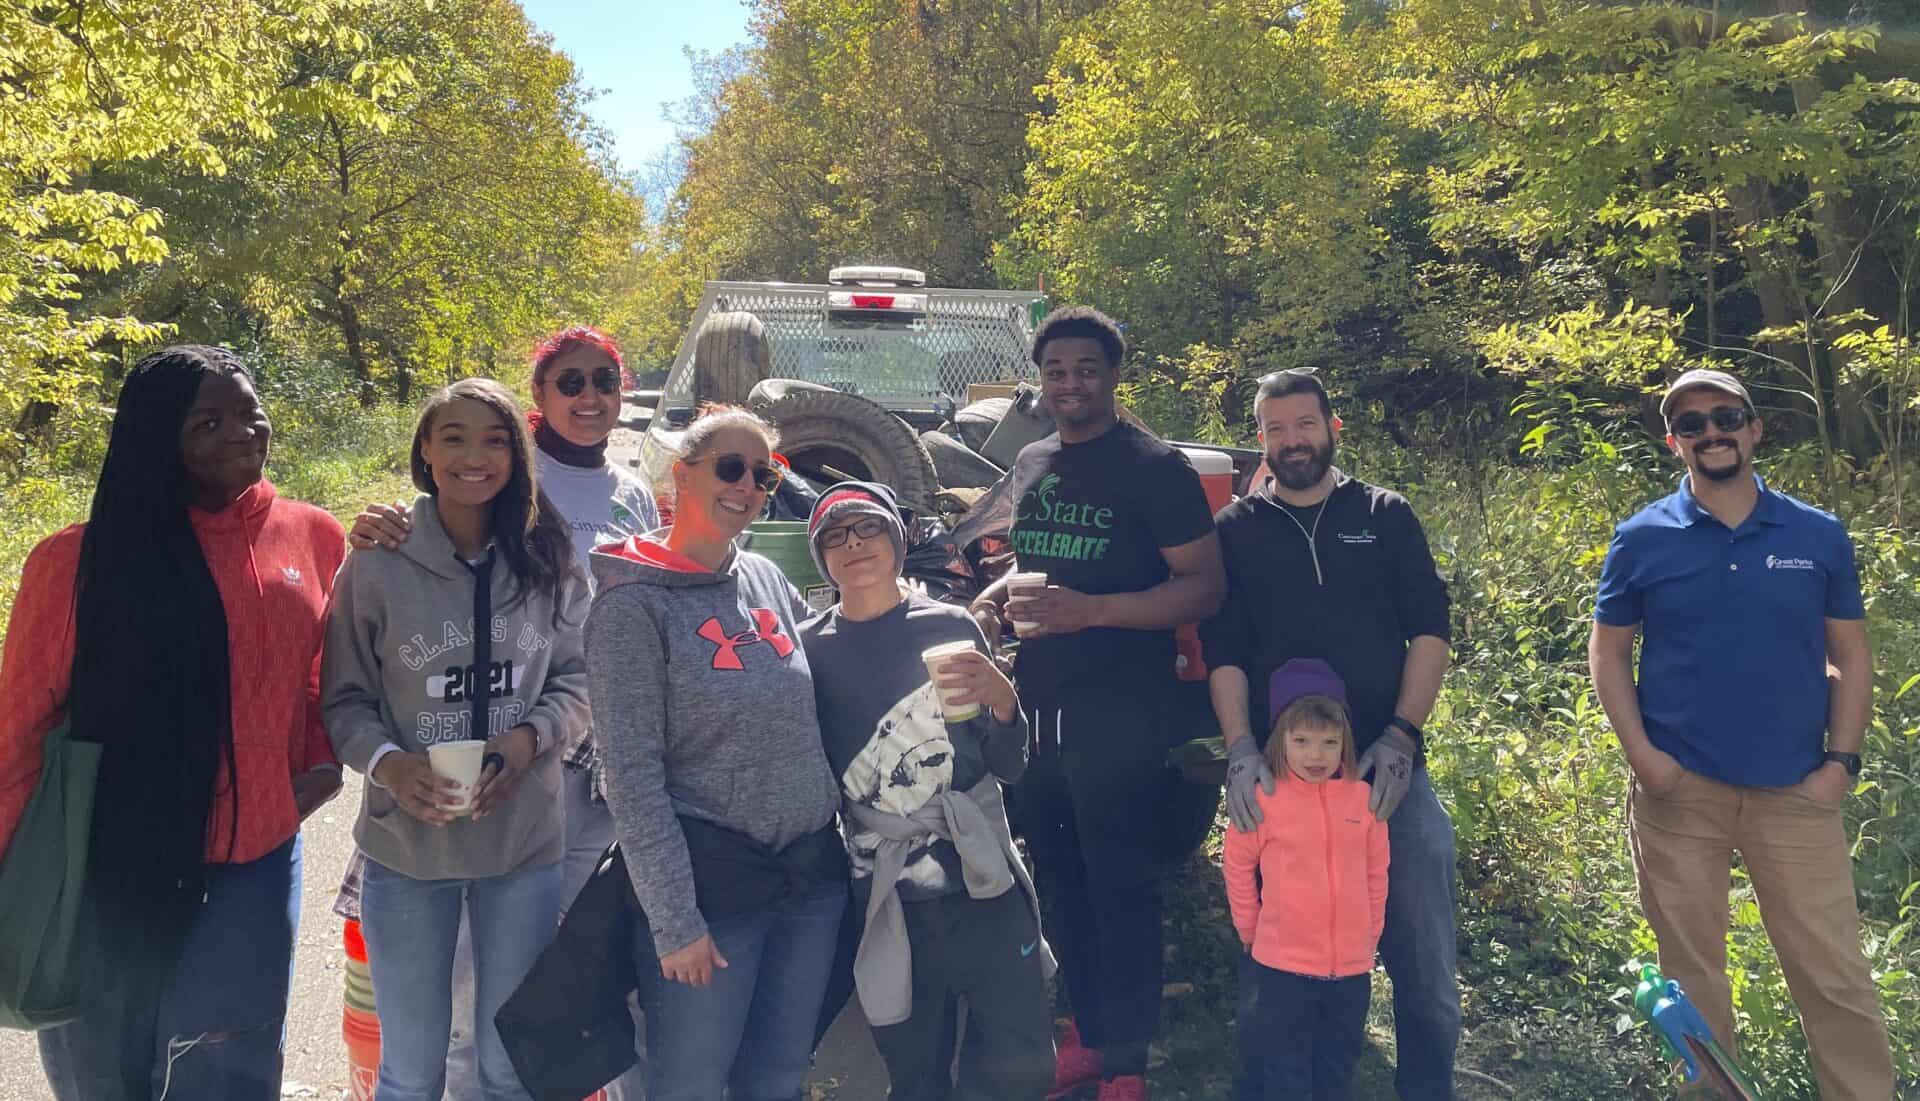 Students and faculty took a break during the October Great Parks clean-up event